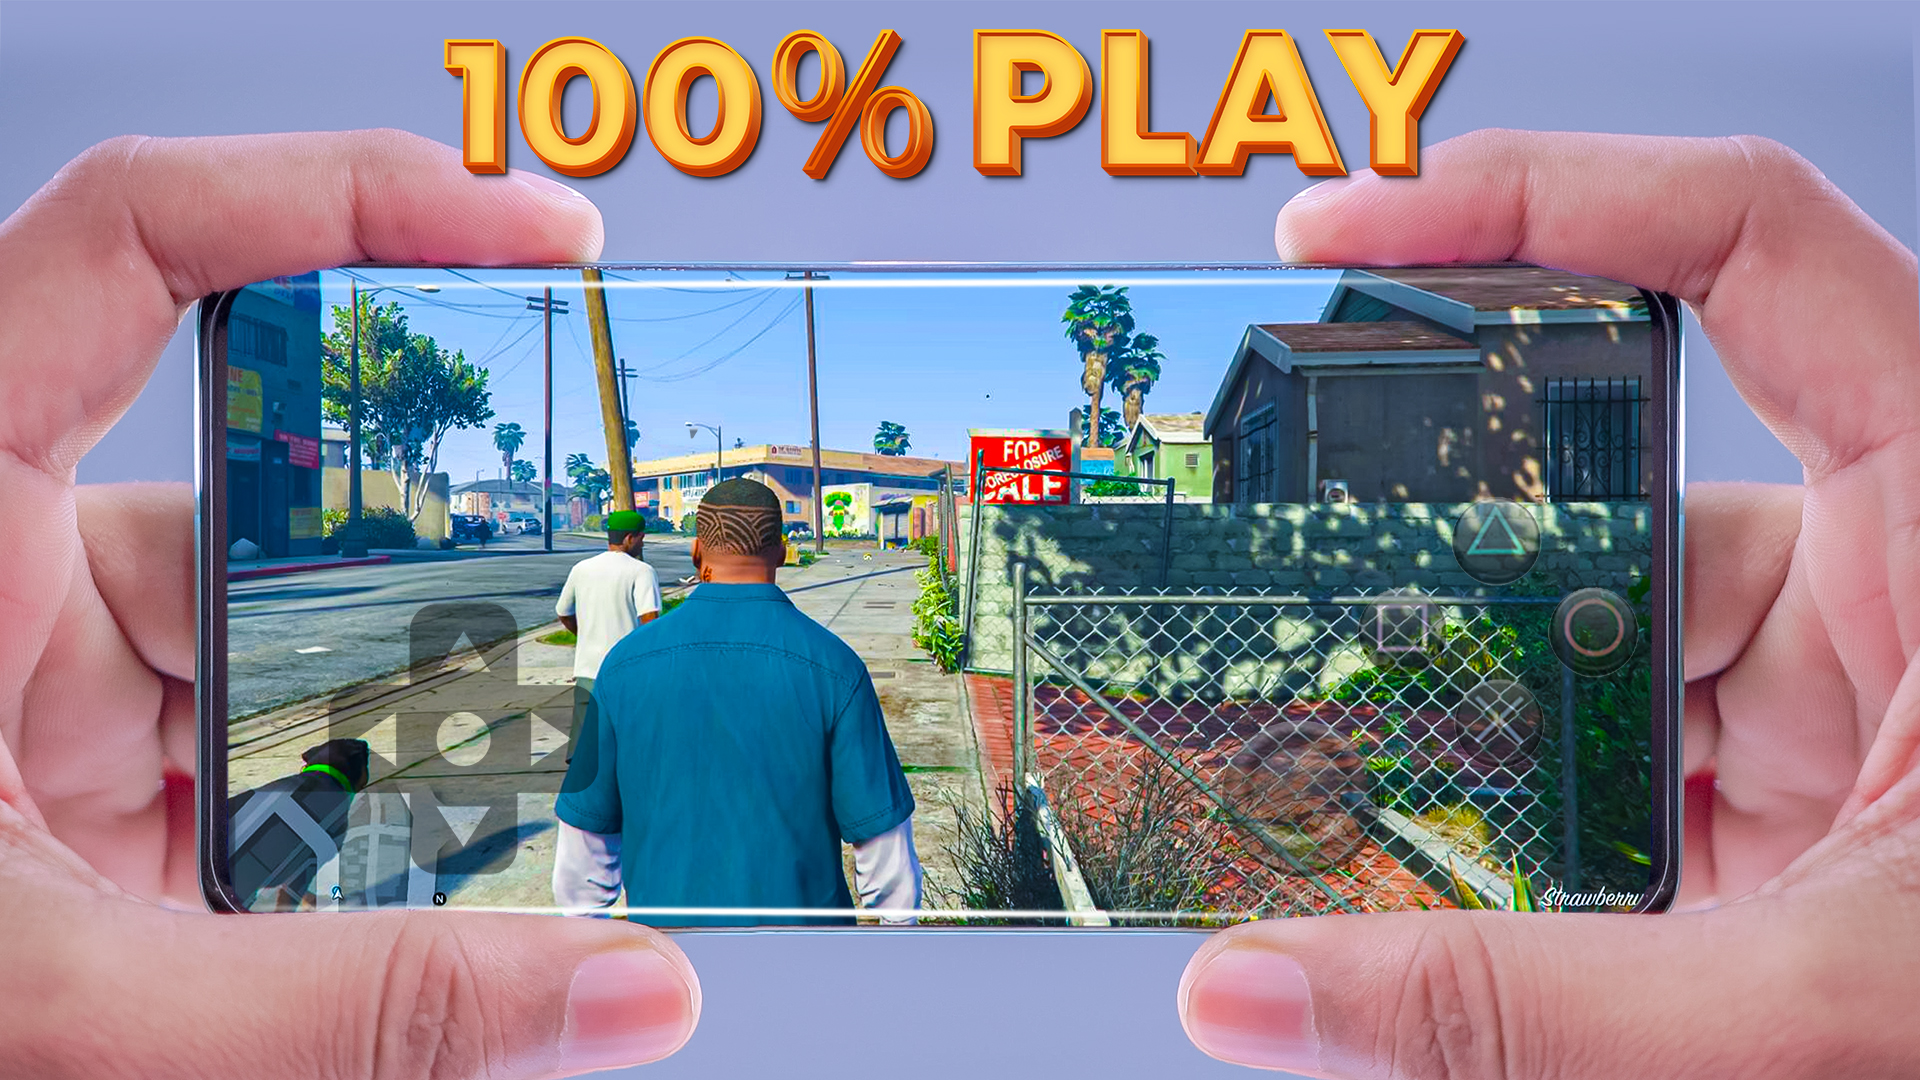 How To Play GTA 5 on Any Android Smartphone!